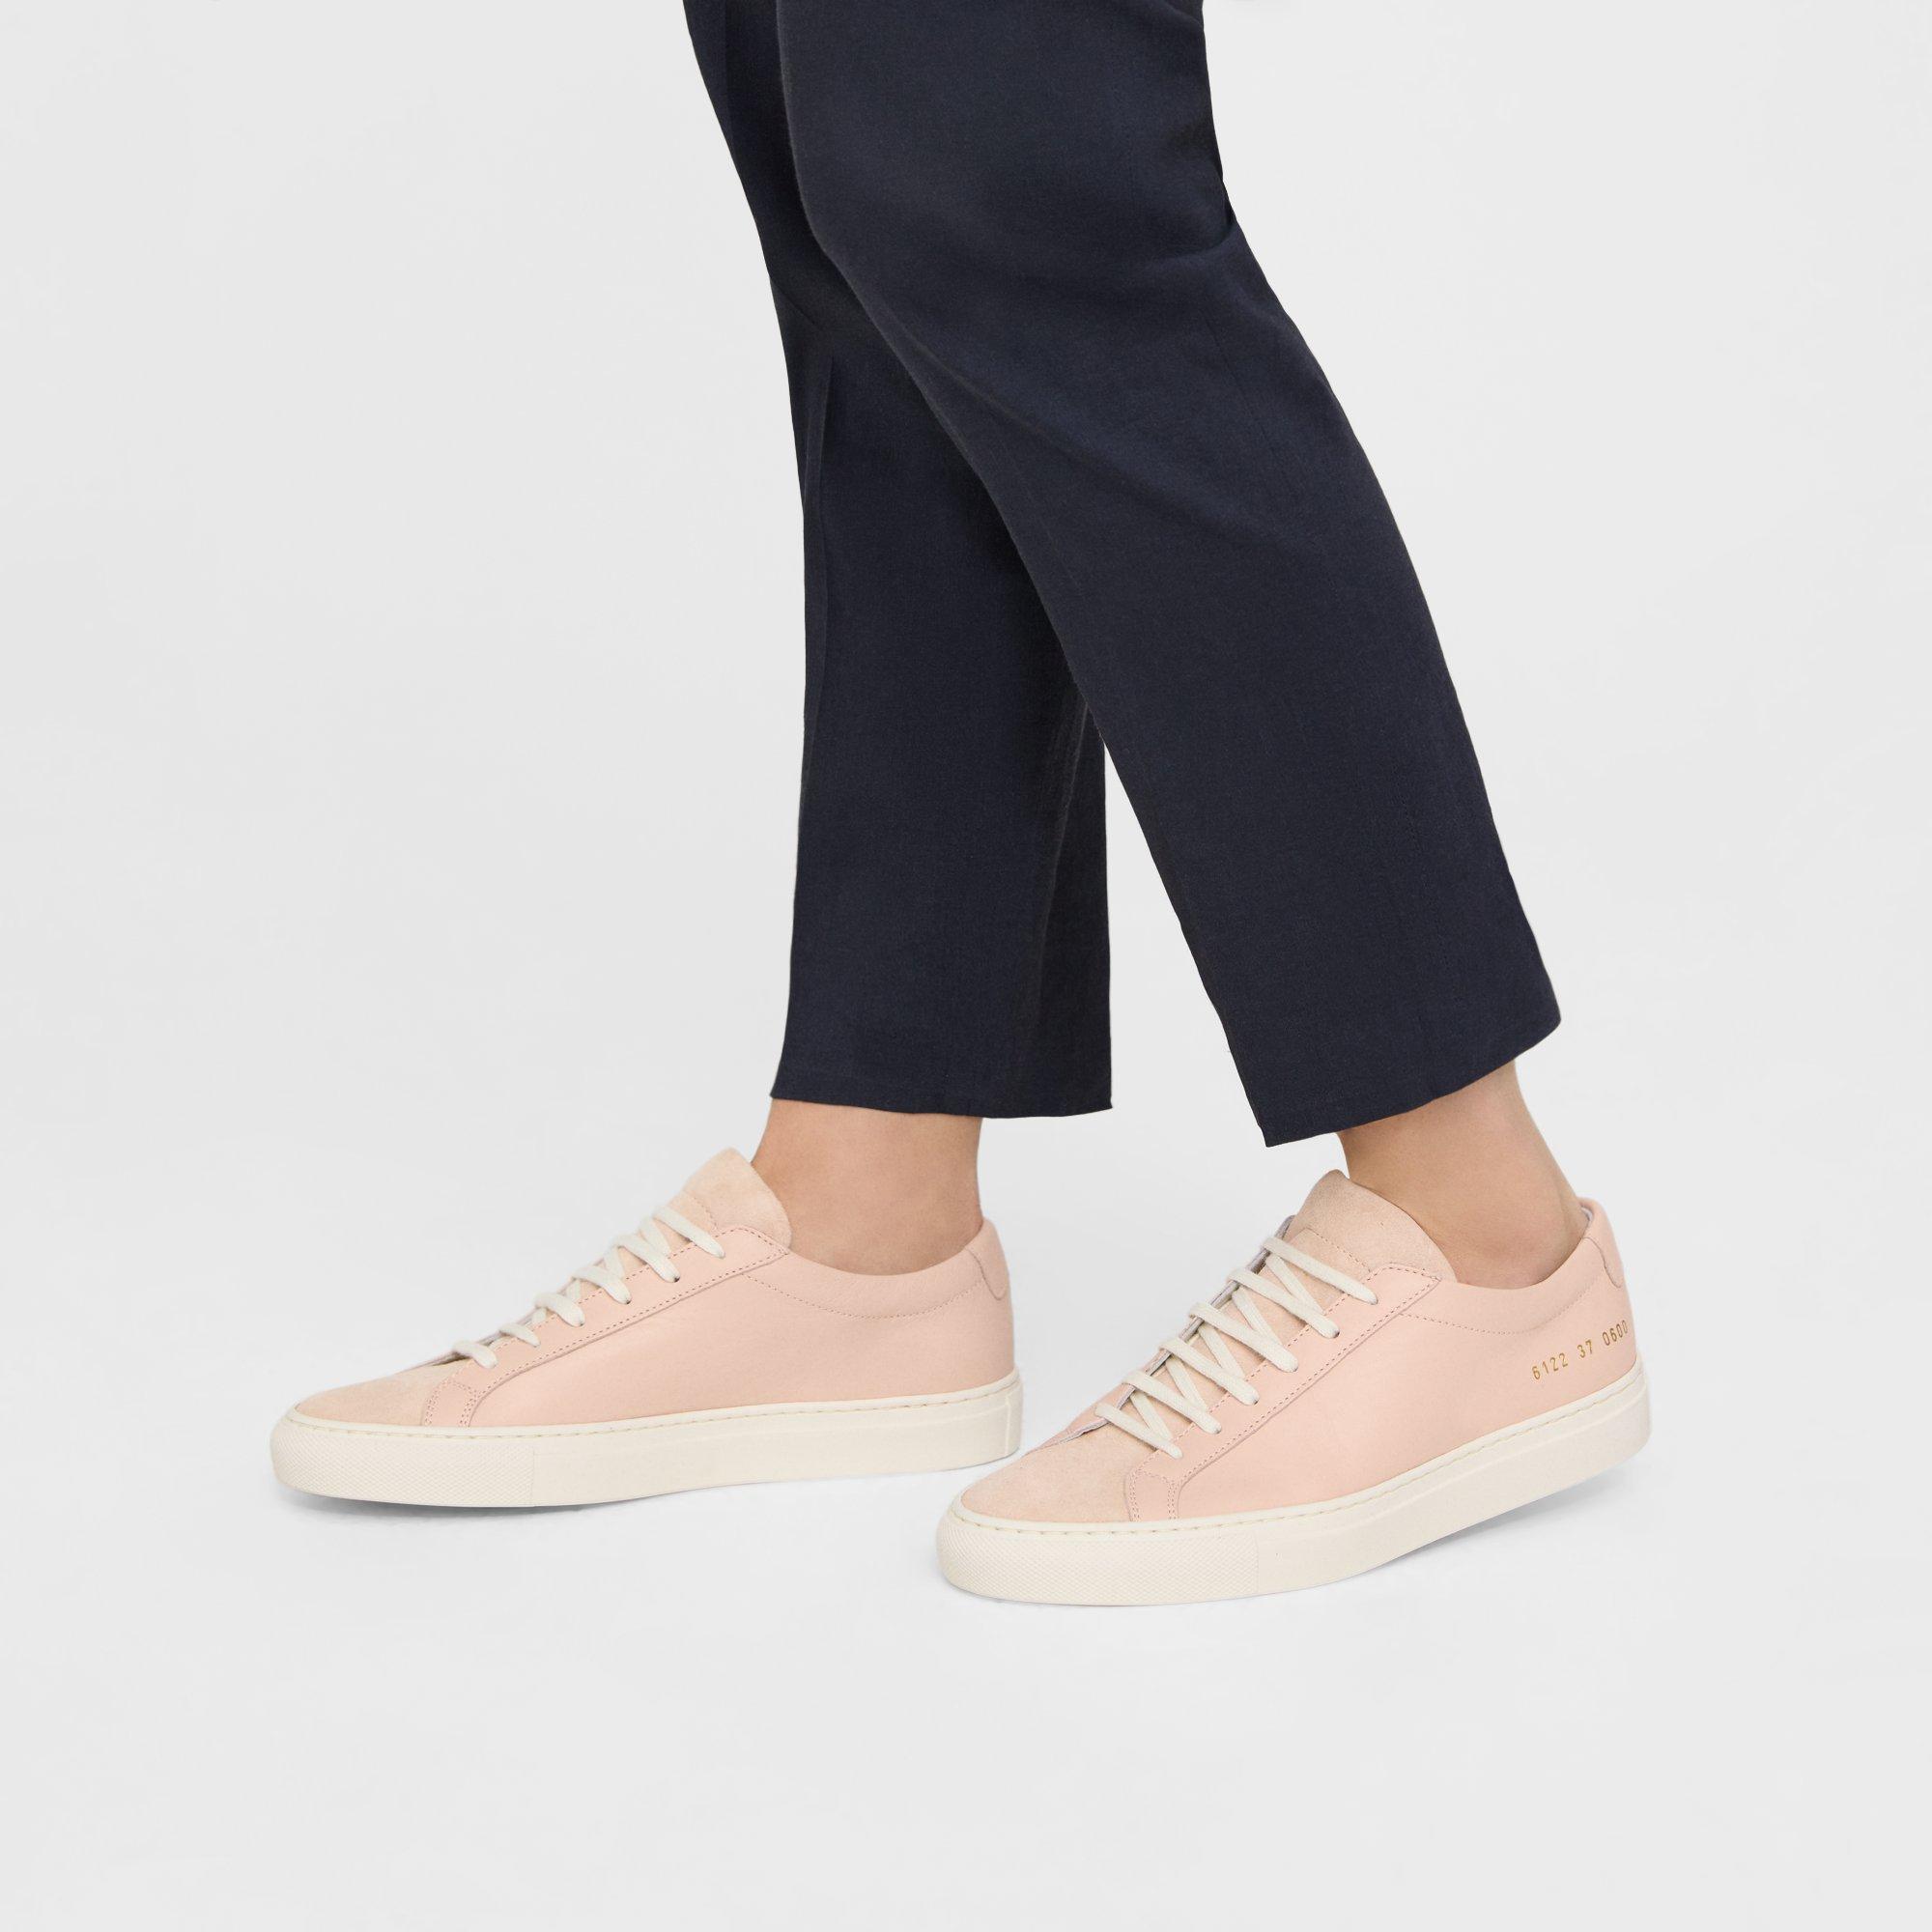 Theory Common Projects Women's Original Achilles Sneakers